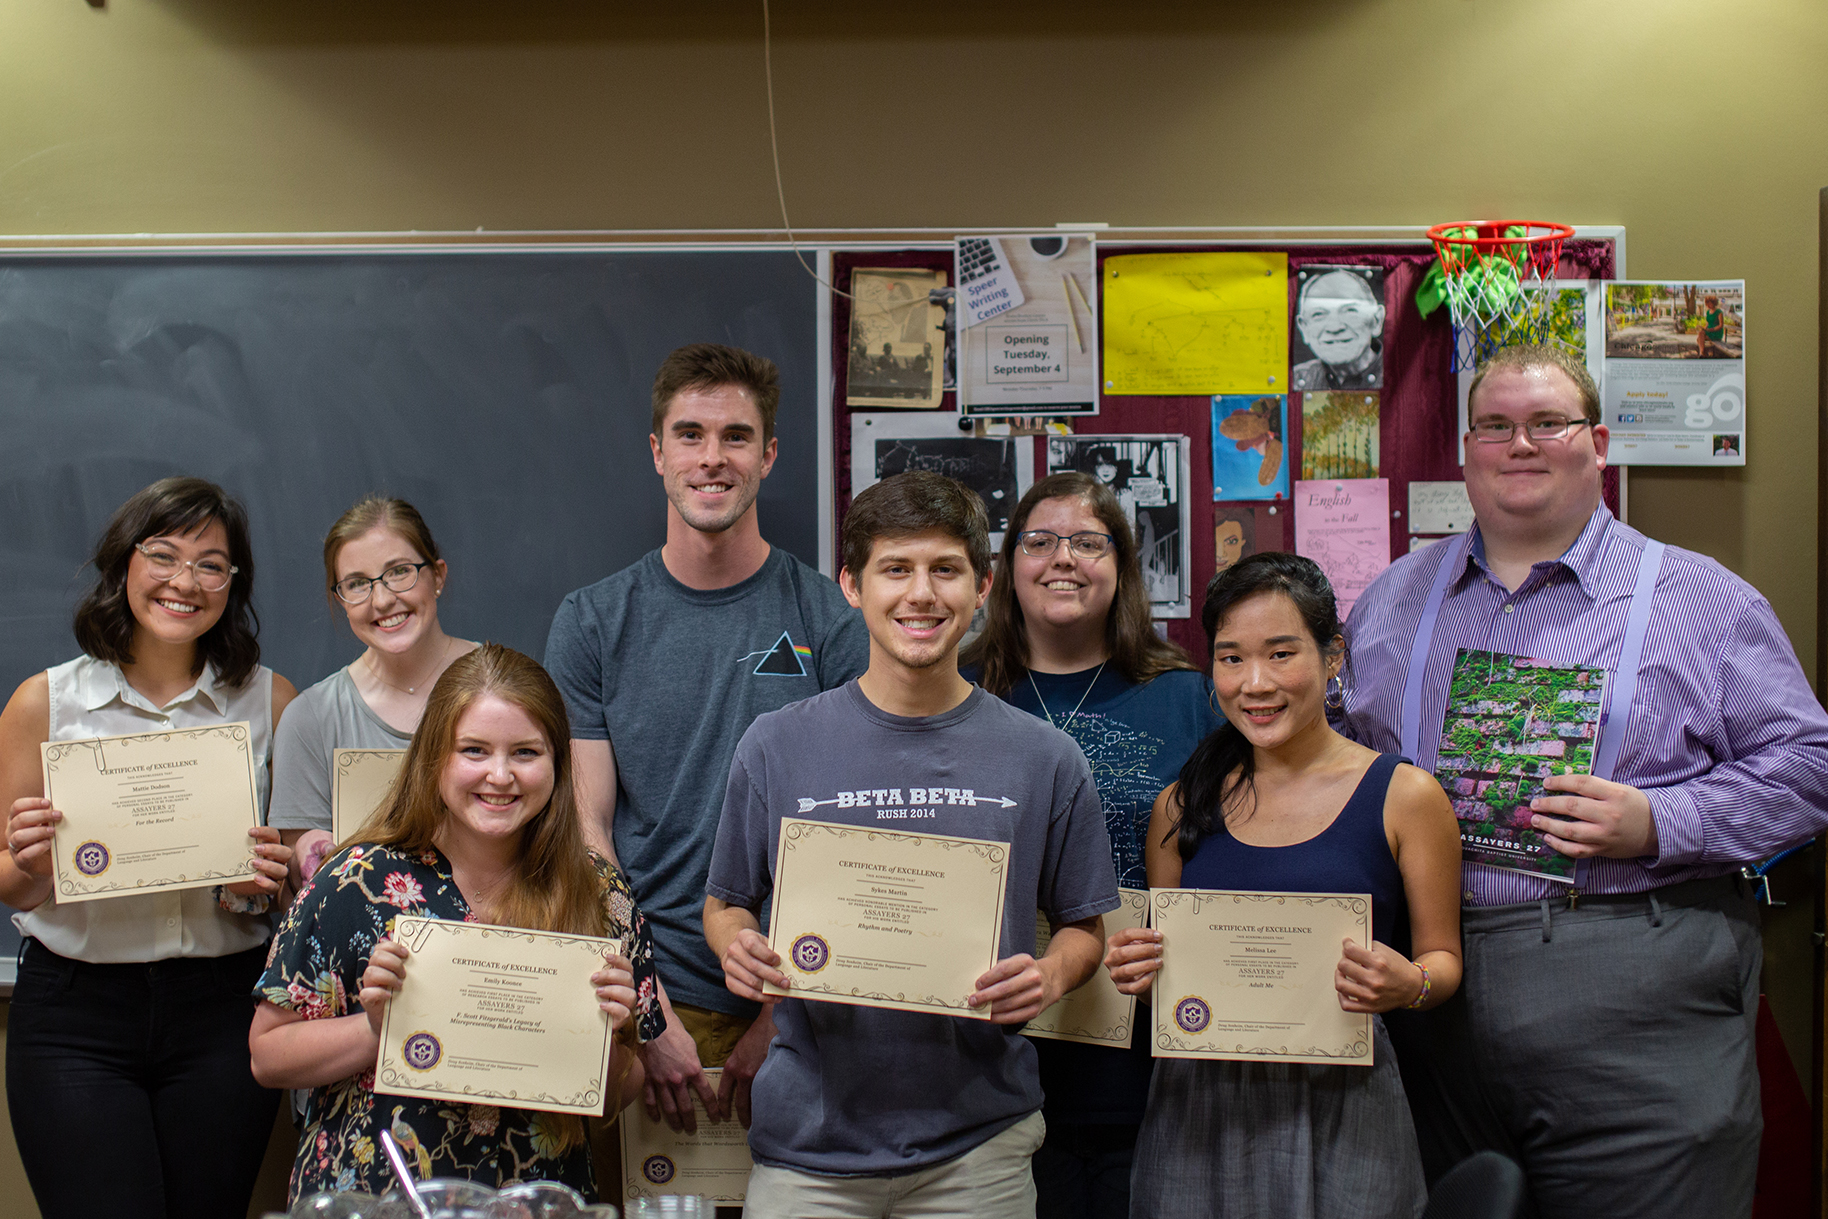 Students were recently honored for having their essays chosen for publication in Assayers 27 (from left): Mattie Dodson, Lindsey Johnson Edwards, Emily Koonce, Aaron East, Sykes Martin, Laura Ward and Melissa Lee. The chosen cover photo for the journal was by Duel Cunningham, at right. Not pictured is Morgan Howard.